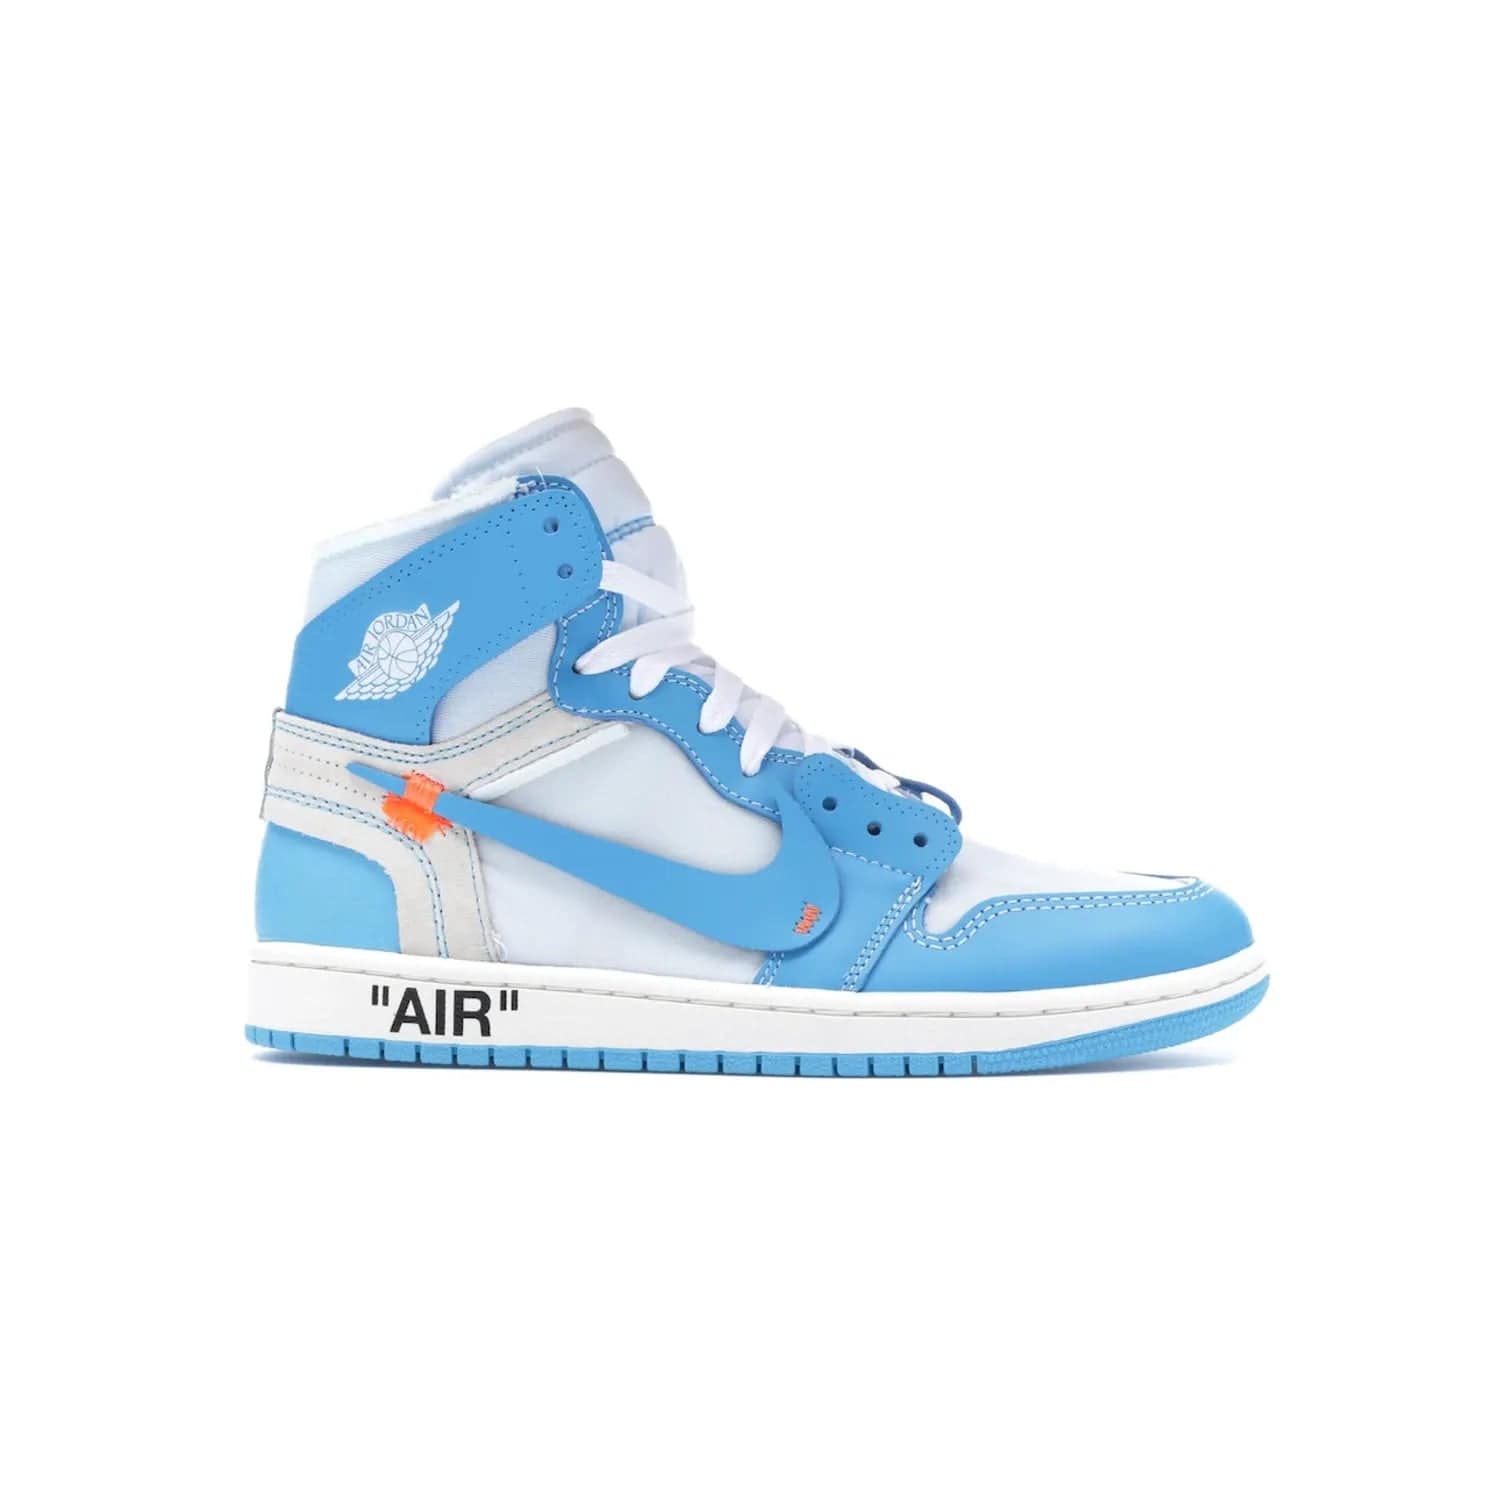 Jordan 1 Retro High Off-White University Blue - Image 2 - Only at www.BallersClubKickz.com - Classic Jordan 1 Retro High "Off-White UNC" sneakers meld style and comfort. Boasting deconstructed white and blue leather, Off-White detailing, and a white, dark powder blue and cone colorway, these sneakers are perfect for dressing up or down. Get the iconic Off-White Jordan 1's and upgrade your look.